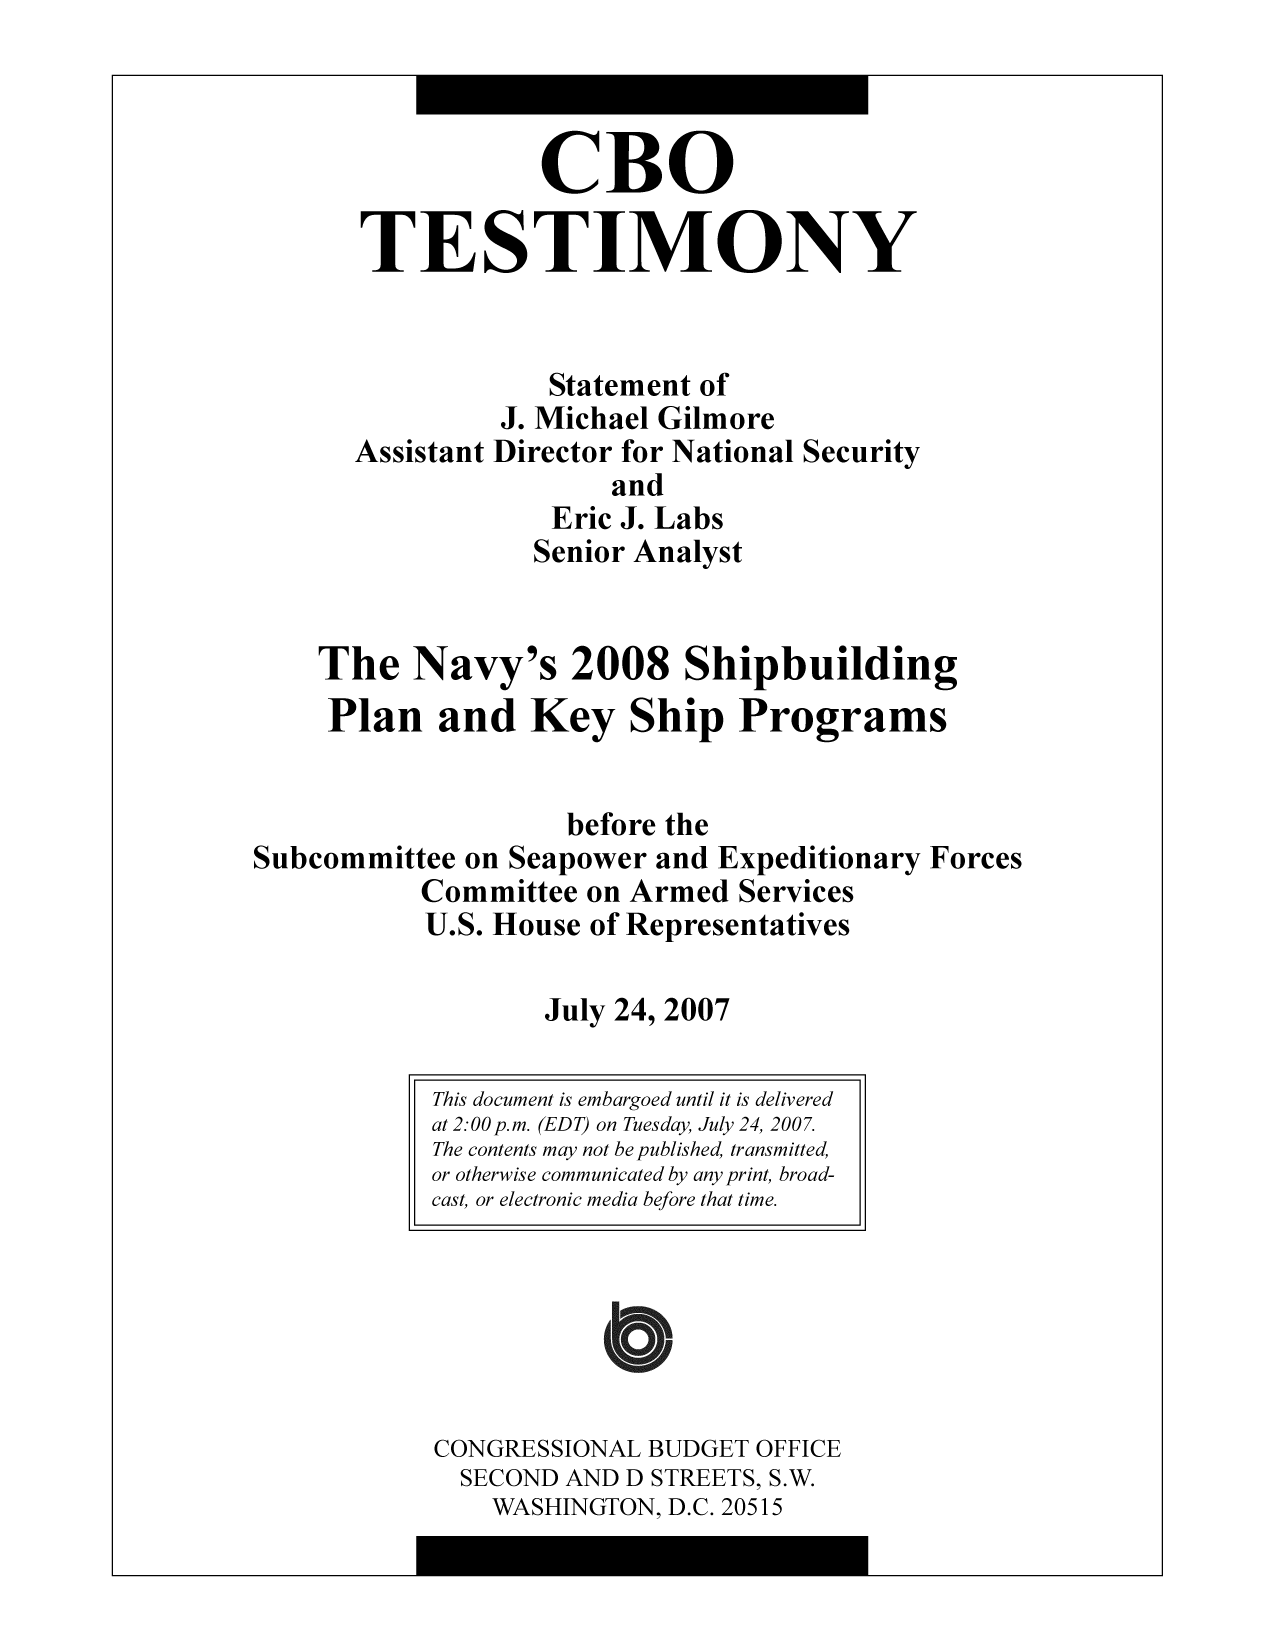 handle is hein.congrec/cbo9878 and id is 1 raw text is: CBO
TESTIMONY
Statement of
J. Michael Gilmore
Assistant Director for National Security
and
Eric J. Labs
Senior Analyst
The Navy's 2008 Shipbuilding
Plan and Key Ship Programs
before the
Subcommittee on Seapower and Expeditionary Forces
Committee on Armed Services
U.S. House of Representatives
July 24, 2007

CONGRESSIONAL BUDGET OFFICE
SECOND AND D STREETS, S.W.
WASHINGTON, D.C. 20515

This document is embargoed until it is delivered
at 2:00 p.m. (EDT) on Tuesday, July 24, 2007.
The contents may not be published, transmitted,
or otherwise communicated by any print, broad-
cast, or electronic media before that time.


